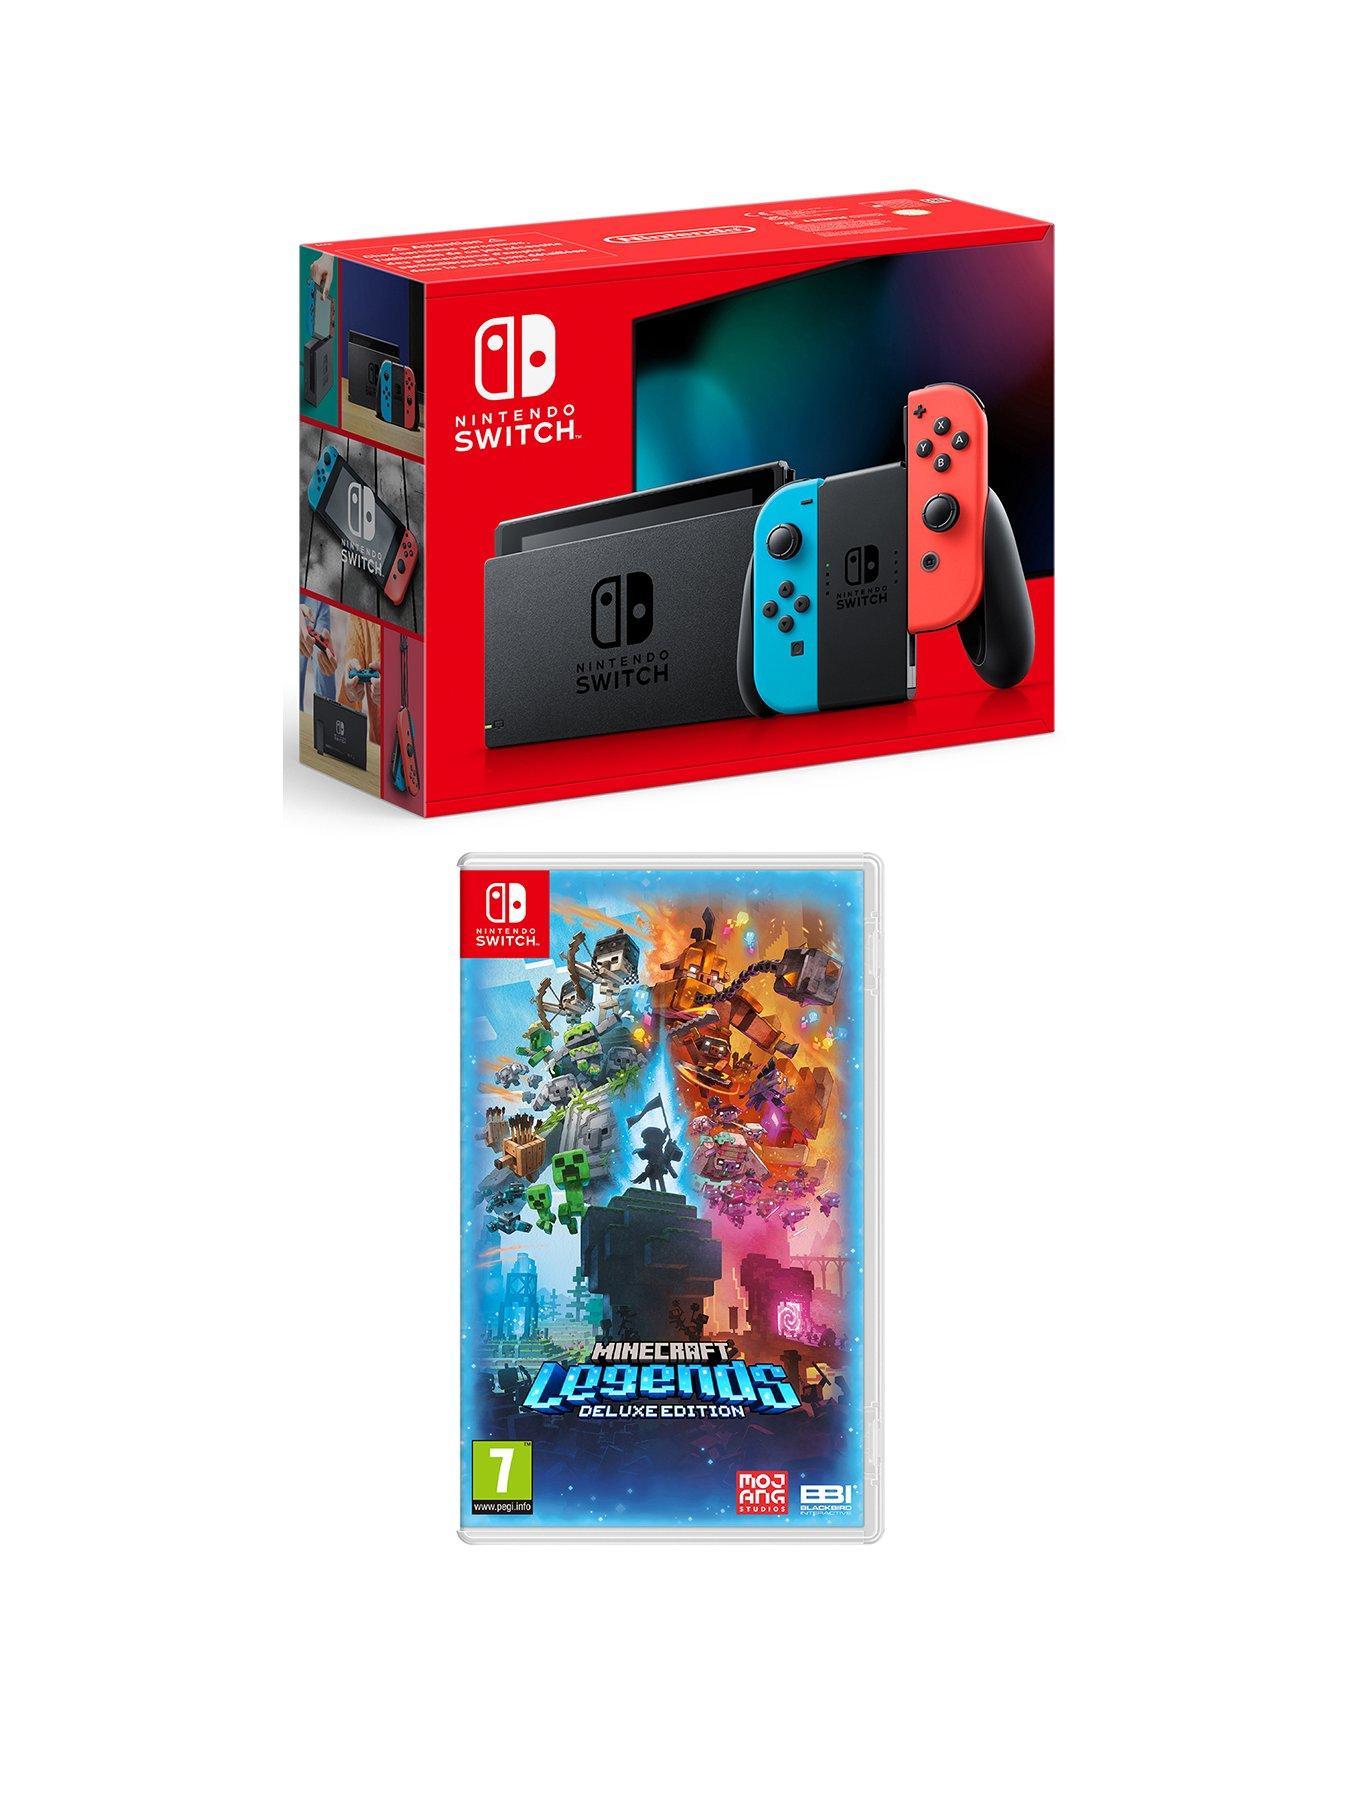 Nintendo Switch Neon Console Legends Deluxe Edition with Minecraft